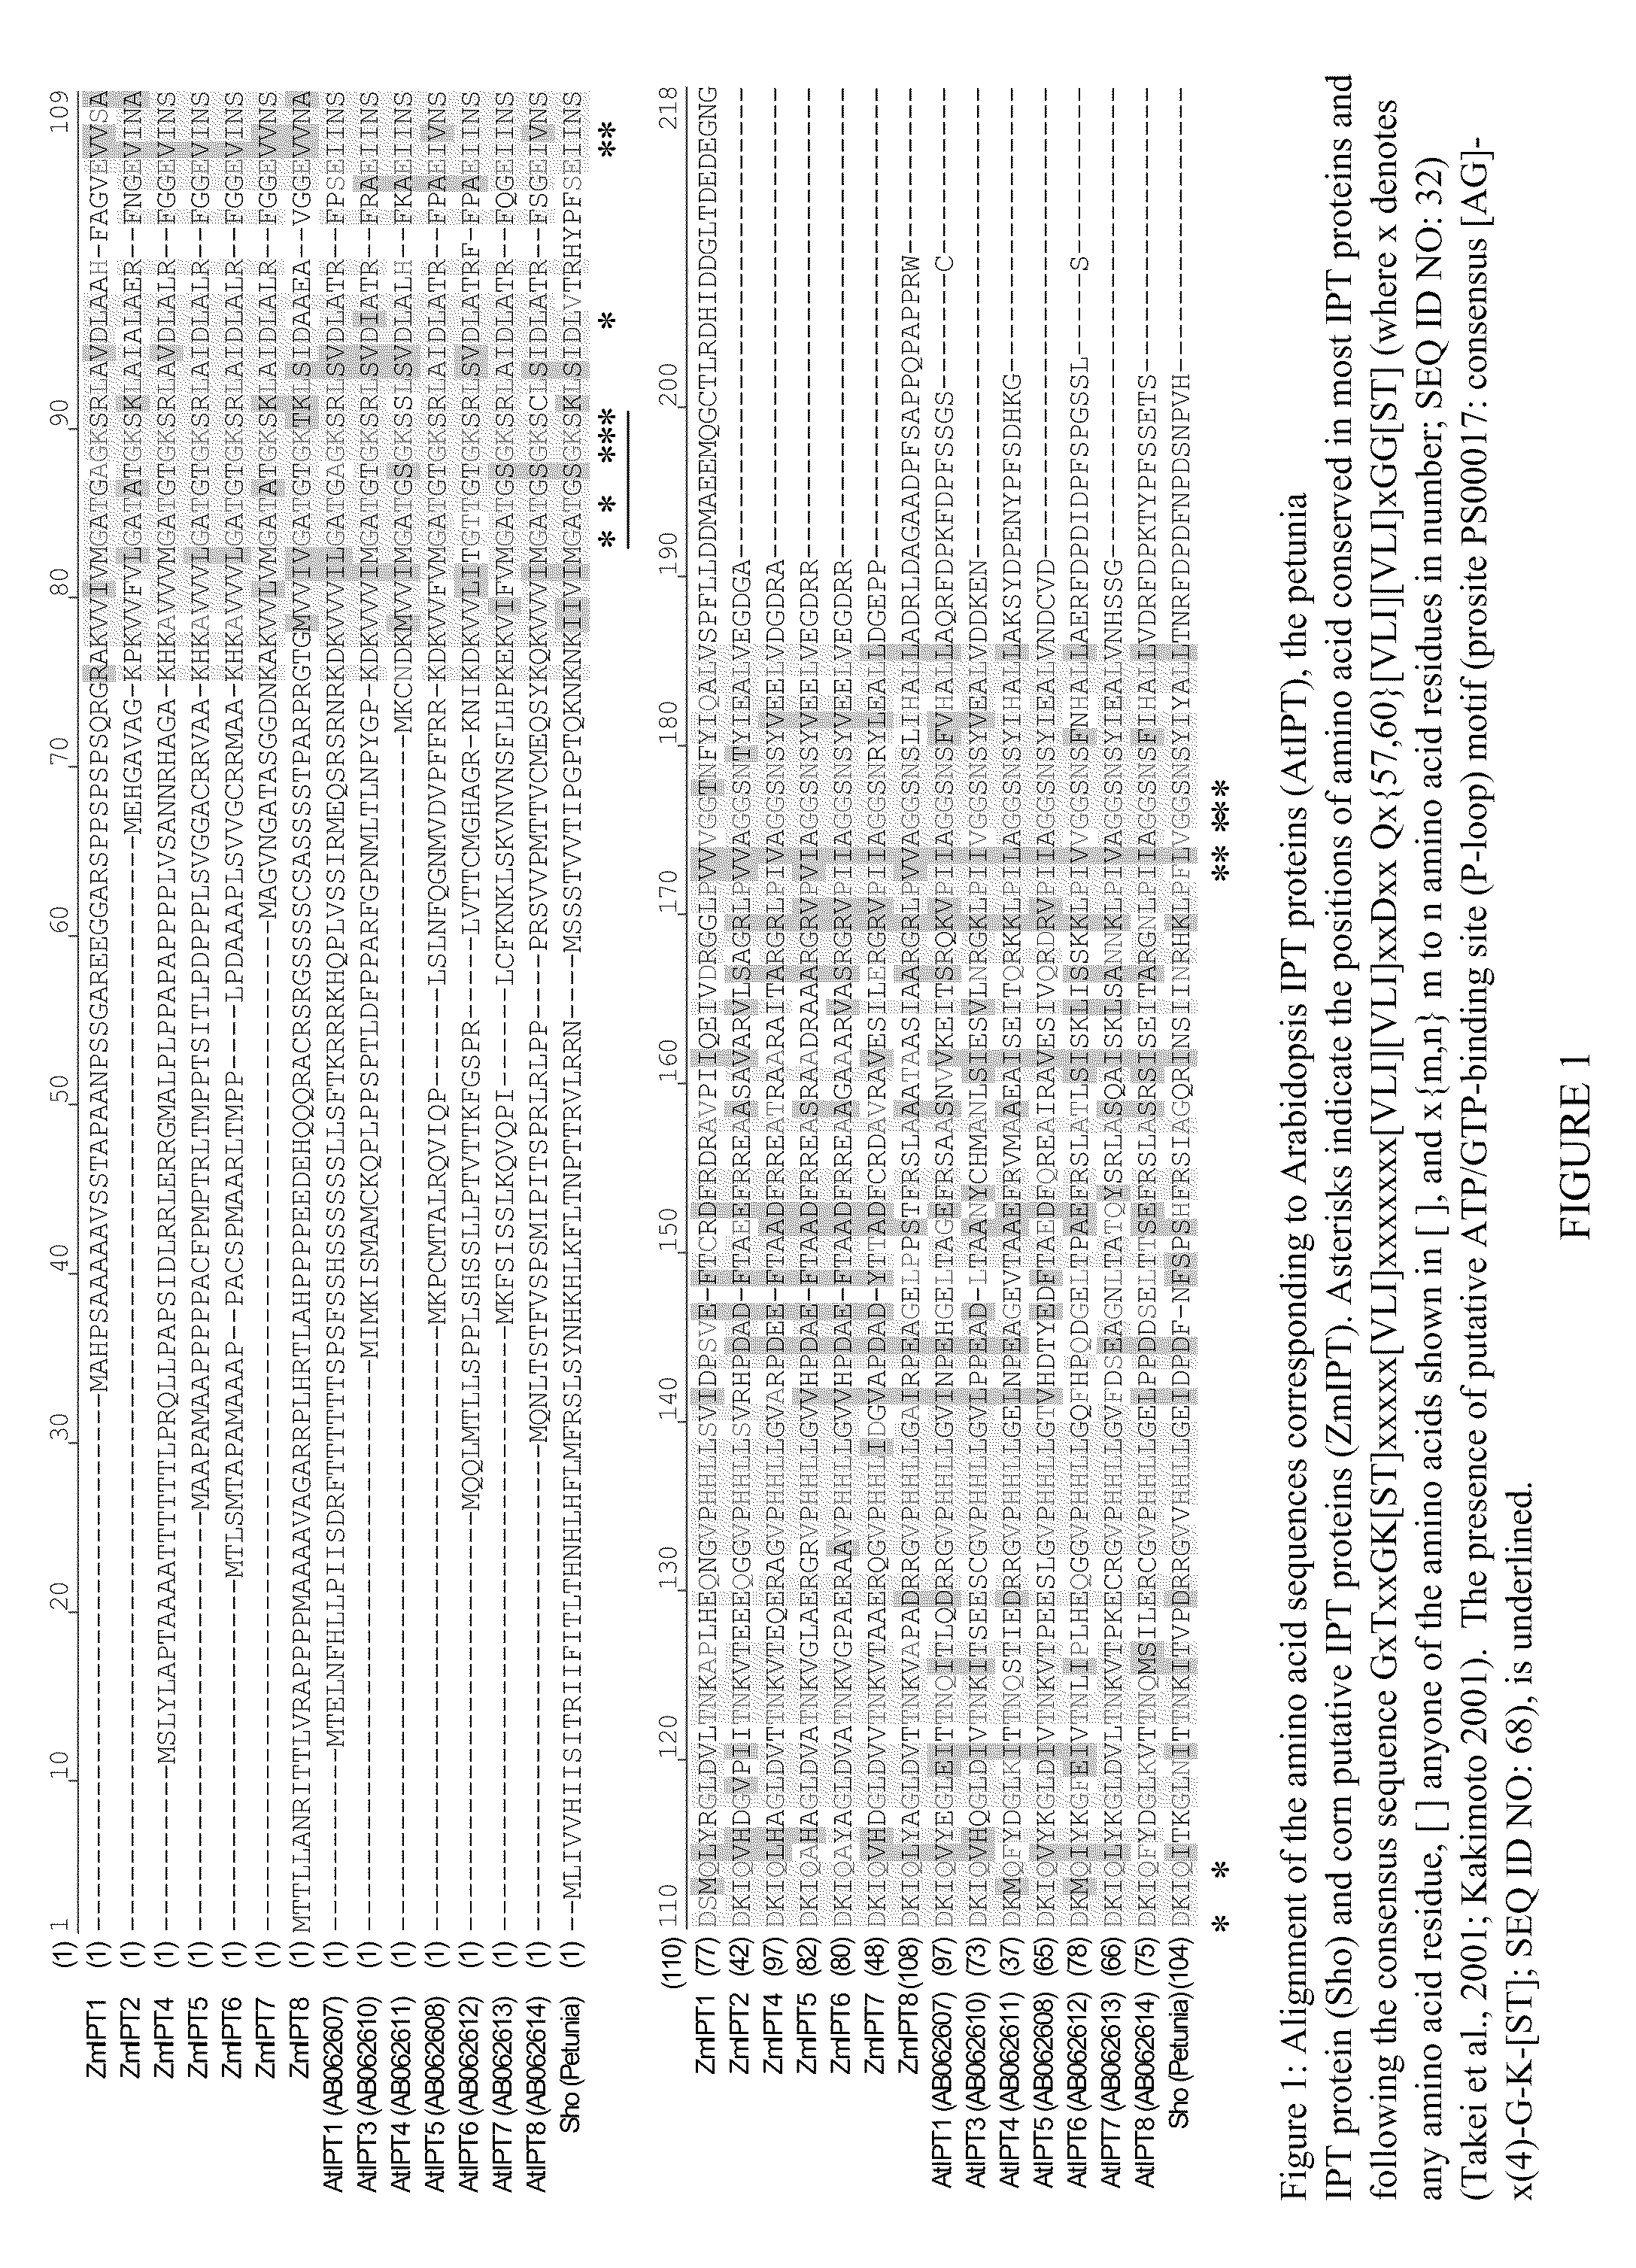 Isopentenyl transferase sequences and methods of use